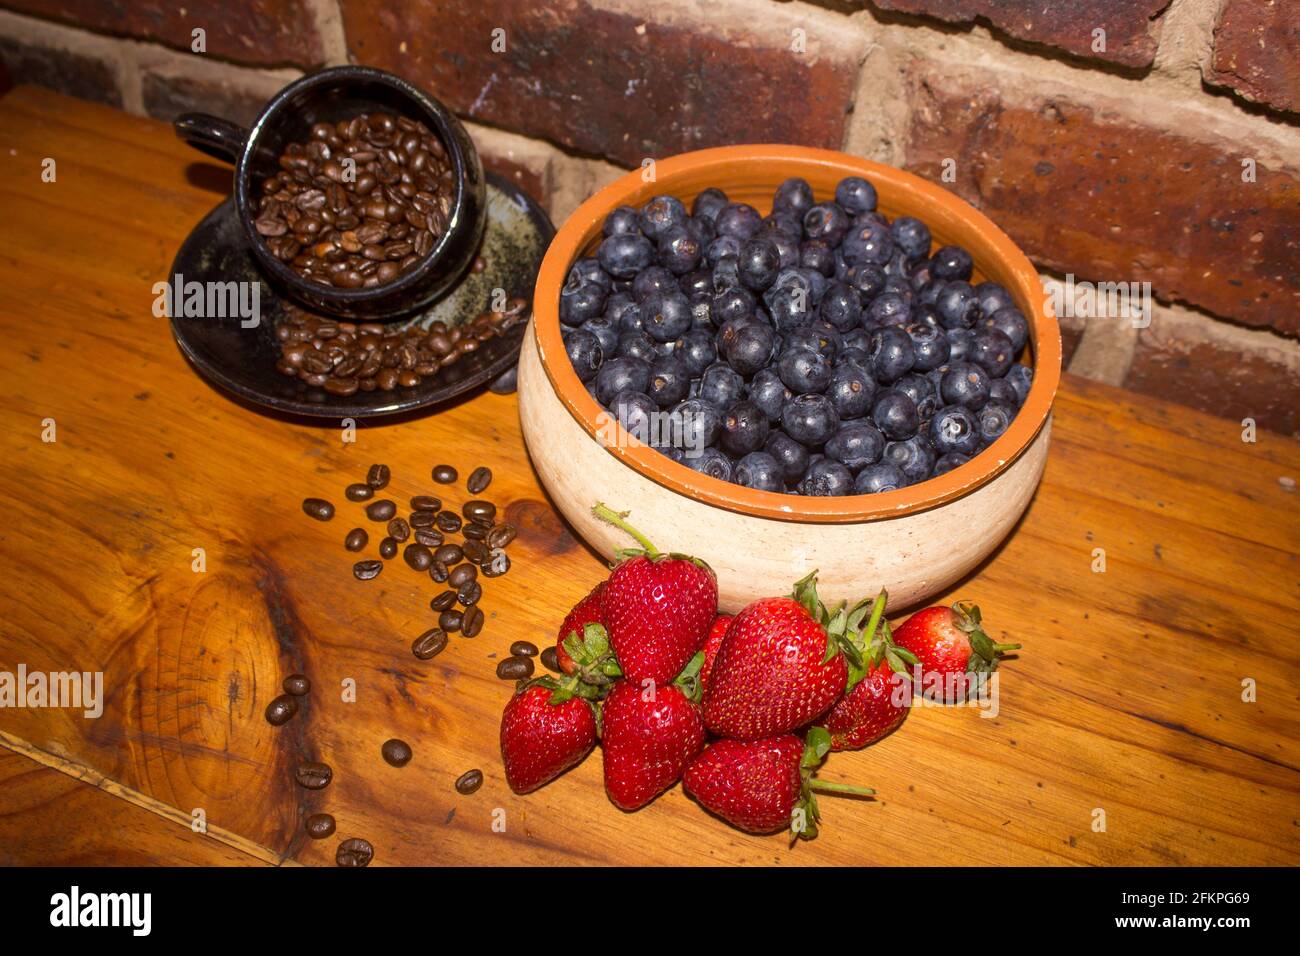 A still live consisting of coffee beans, strawberries and a bowl filled with blueberries, on a wooden tabletop. Stock Photo